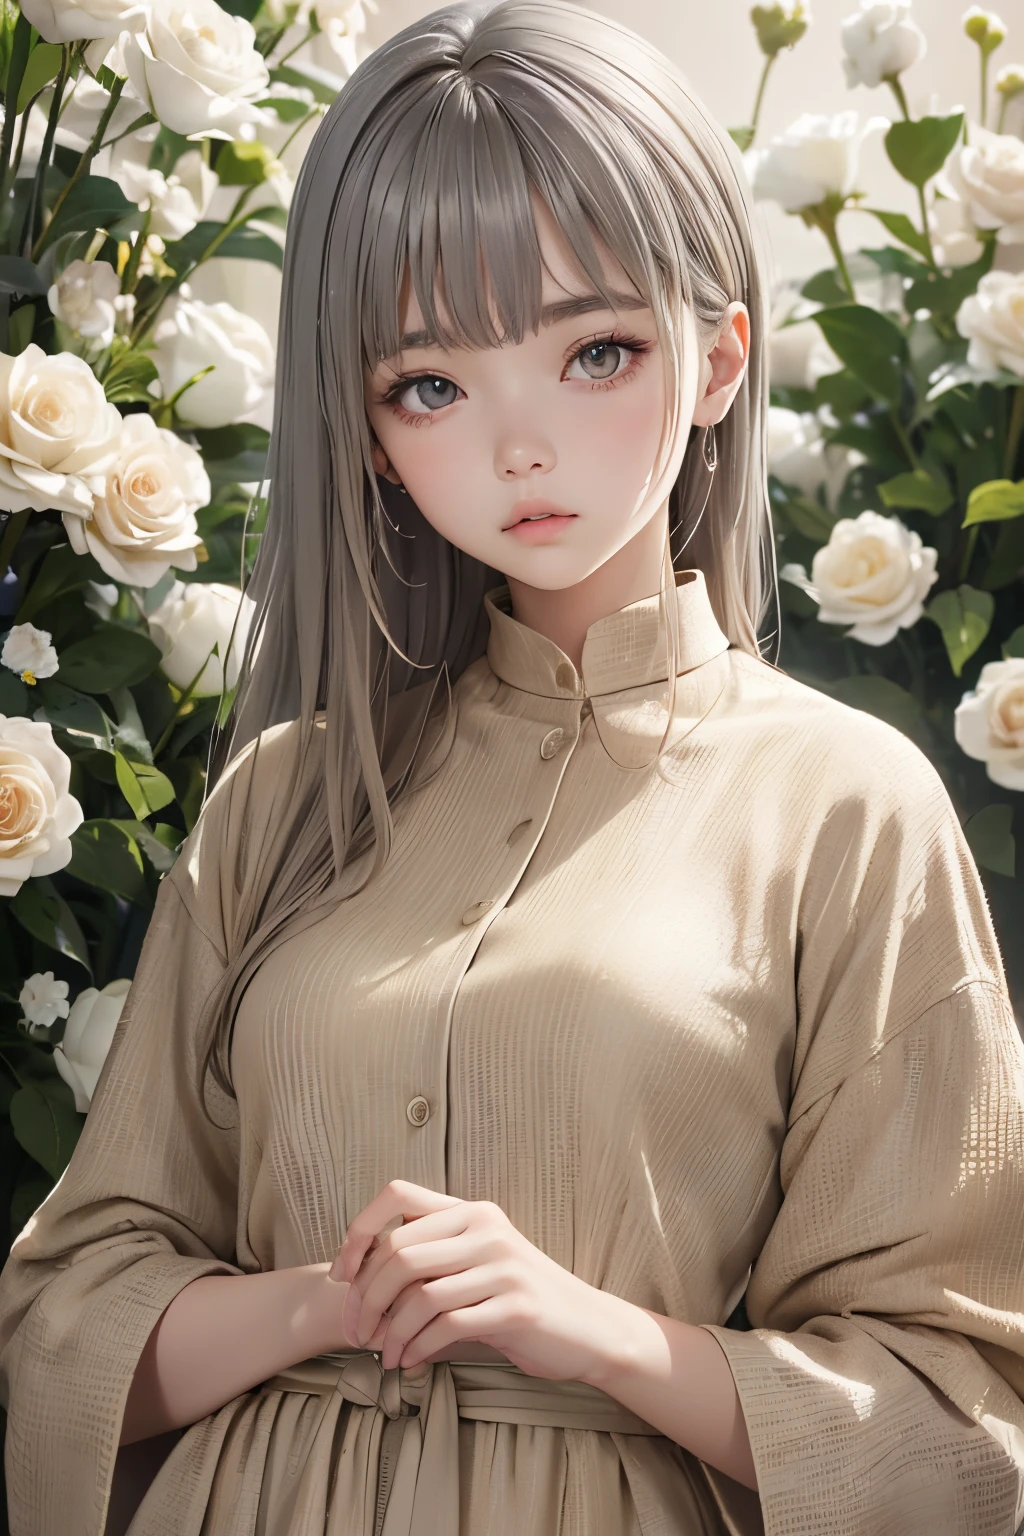 (((Beige World:1.3)))、Best Quality, masutepiece, High resolution, (((1girl in))), sixteen years old,(((Eyes are gray:1.3)))、Beige dress、((Beige shirt:1.3、Beige Color Block Dress)), Tindall Effect, Realistic, Shadow Studio,Ultramarine Lighting, dual-tone lighting, (High Detail Skins: 1.2)、Pale colored lighting、Dark lighting、 Digital SLR, Photo, High resolution, 4K, 8K, Background blur,Fade out beautifully、florals、Flowers in the background、Beige World